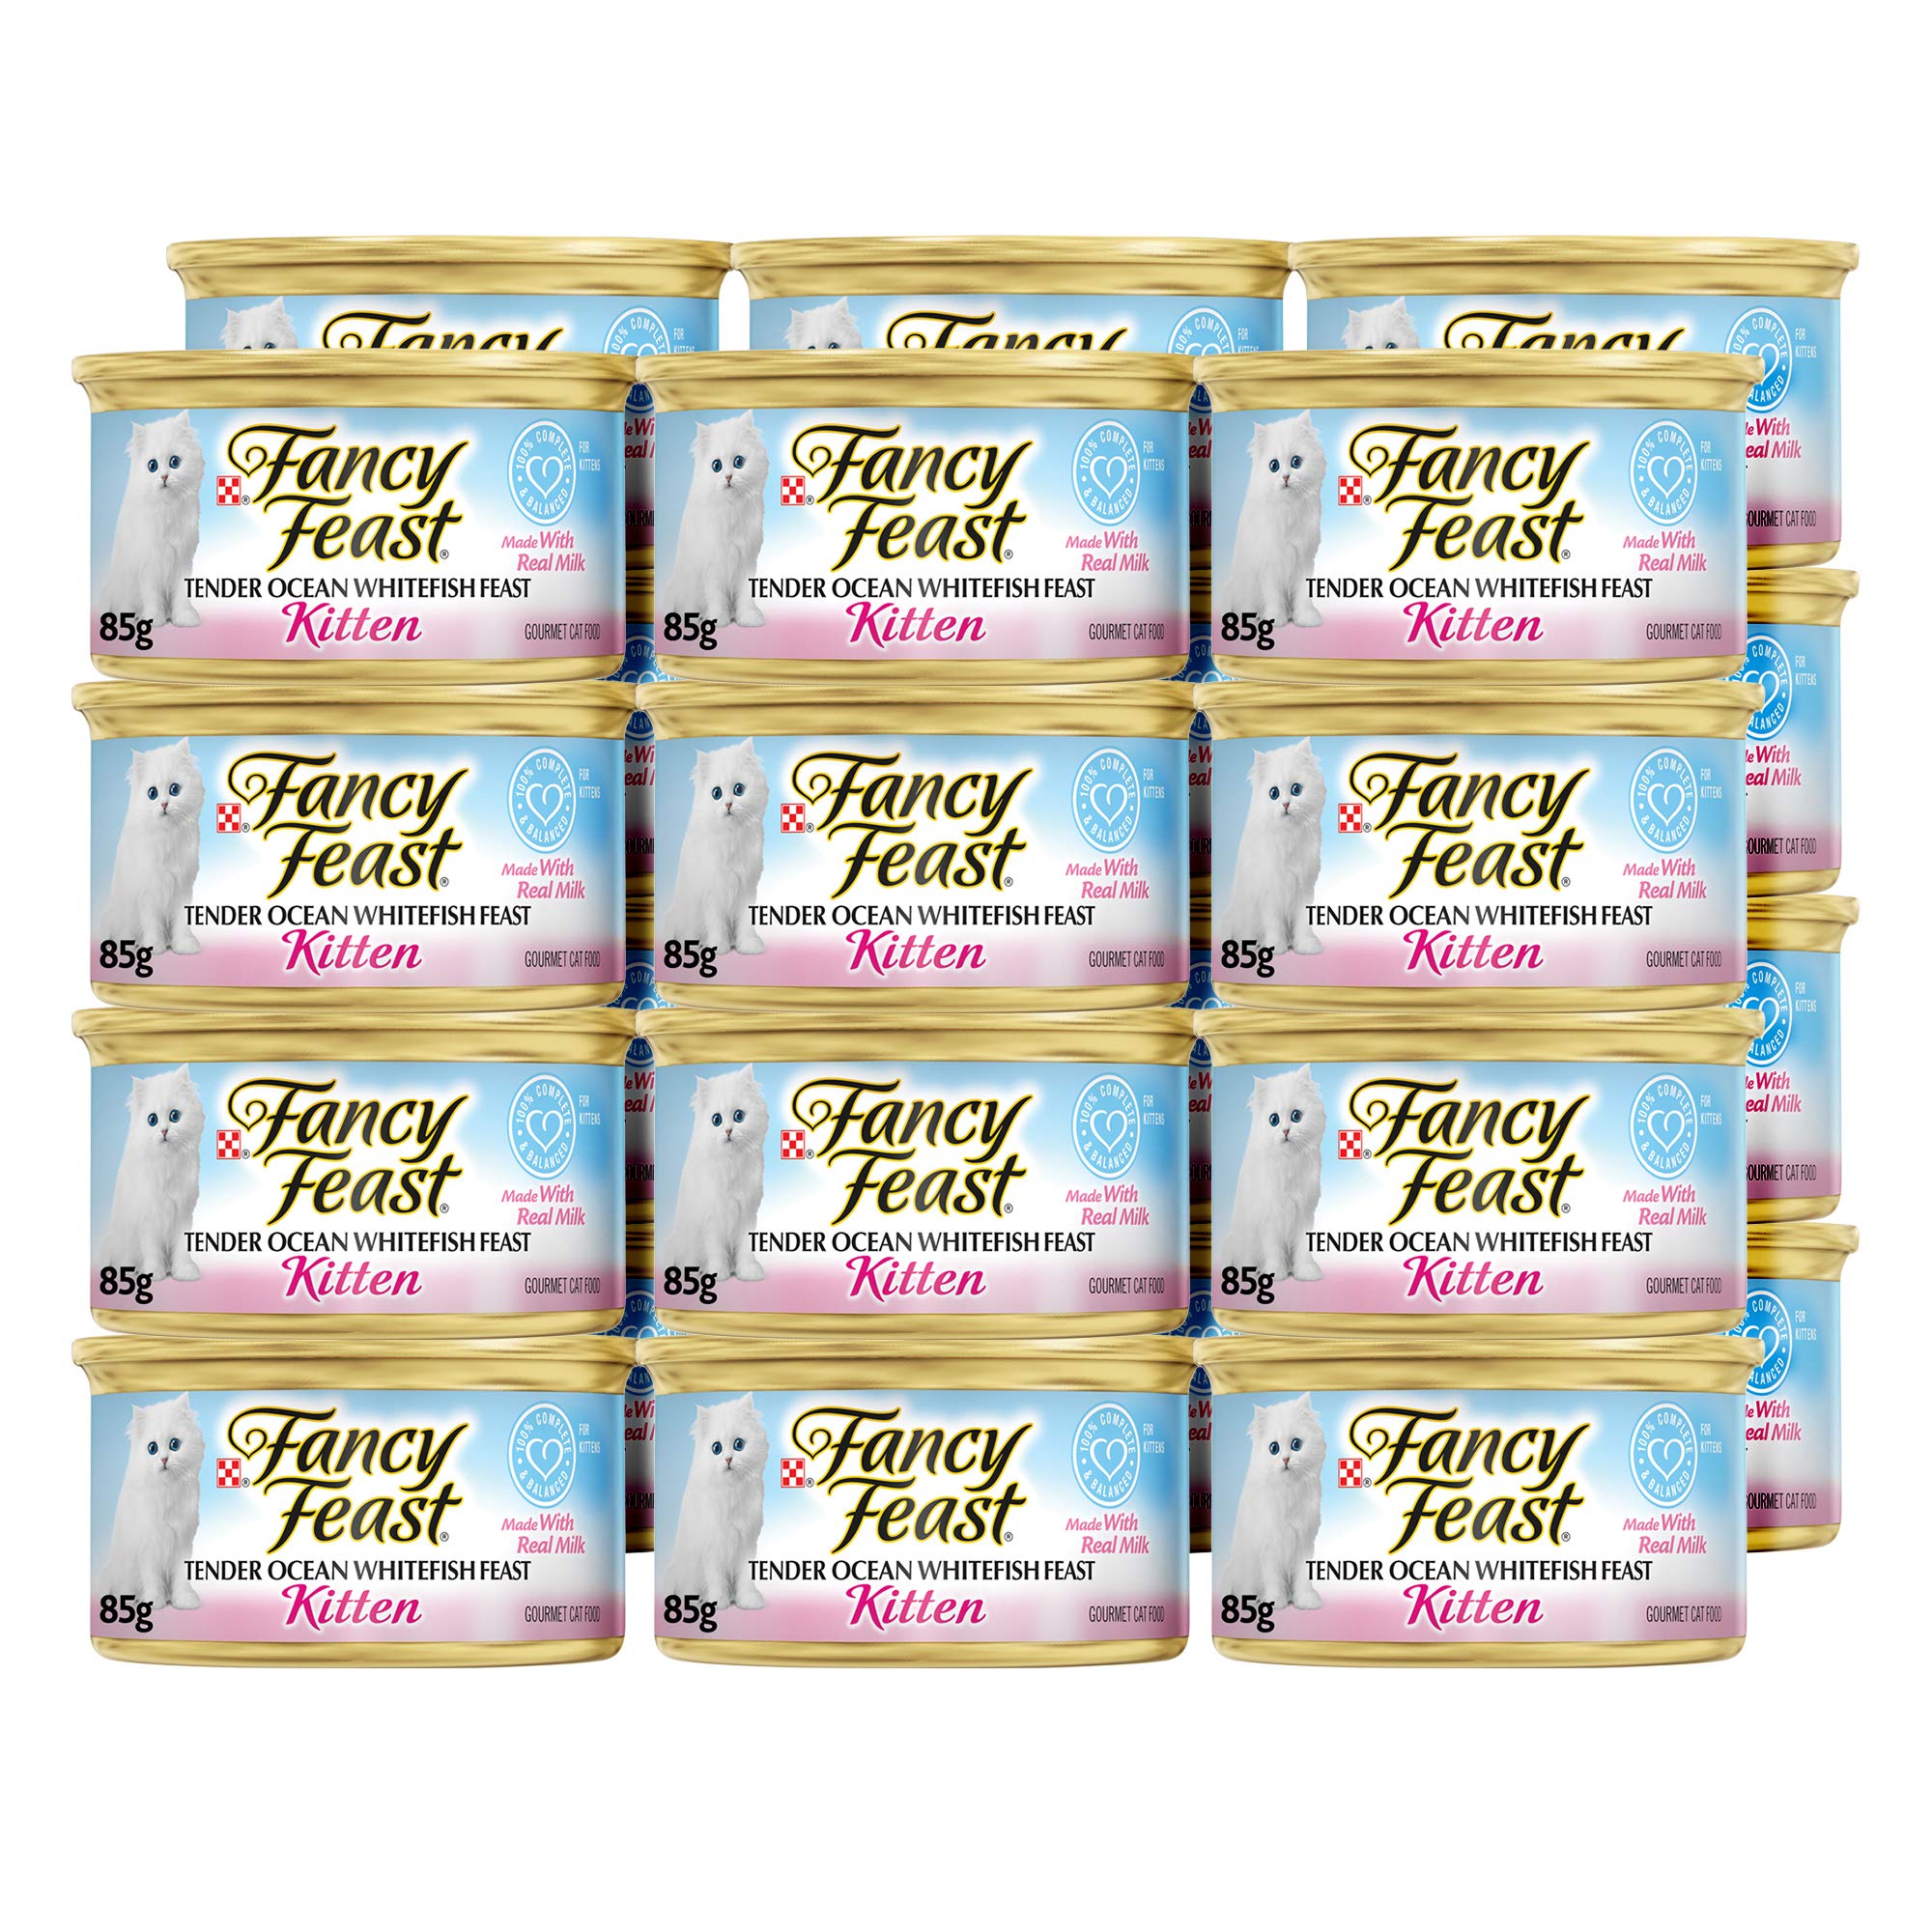 Purina Fancy Feast Wet Kitten Food, Tender Ocean Whitefish Feast - 3 oz. Can(Pack of 2)  $10.96 with S&S               $10.96 with S&S4)